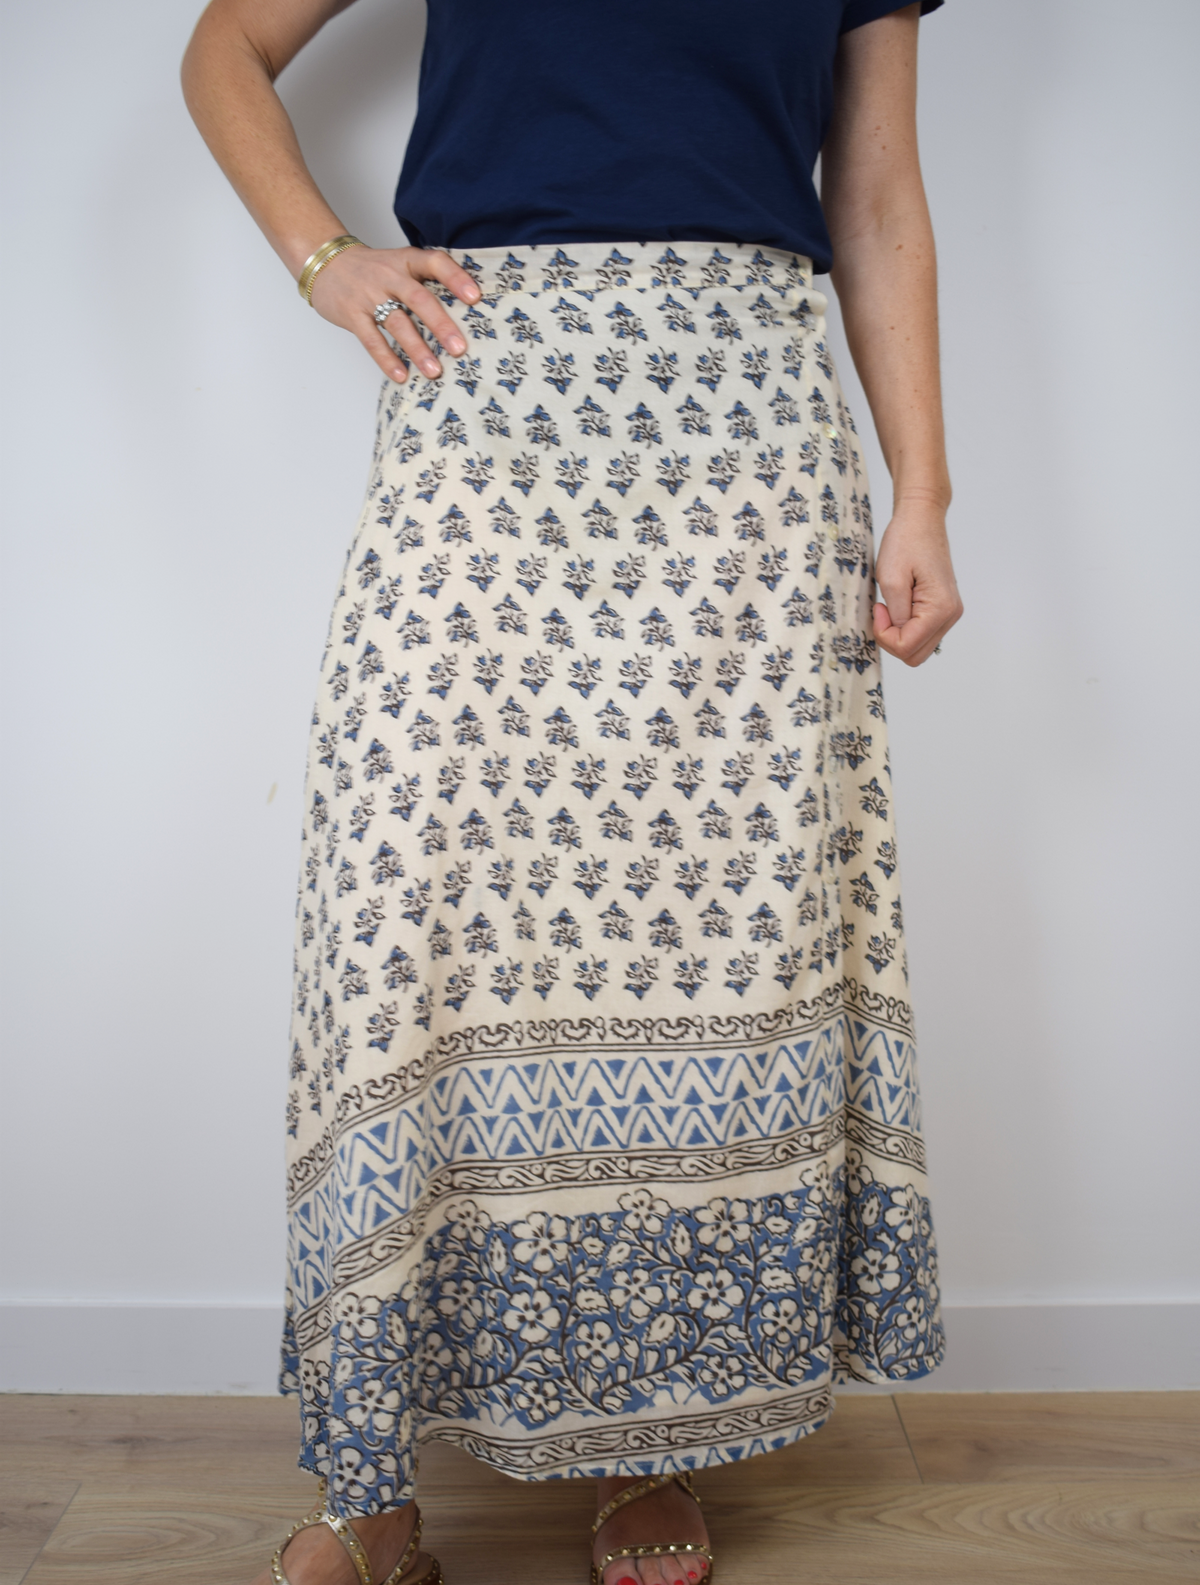 Printed ivory skirt with blue pattern on 